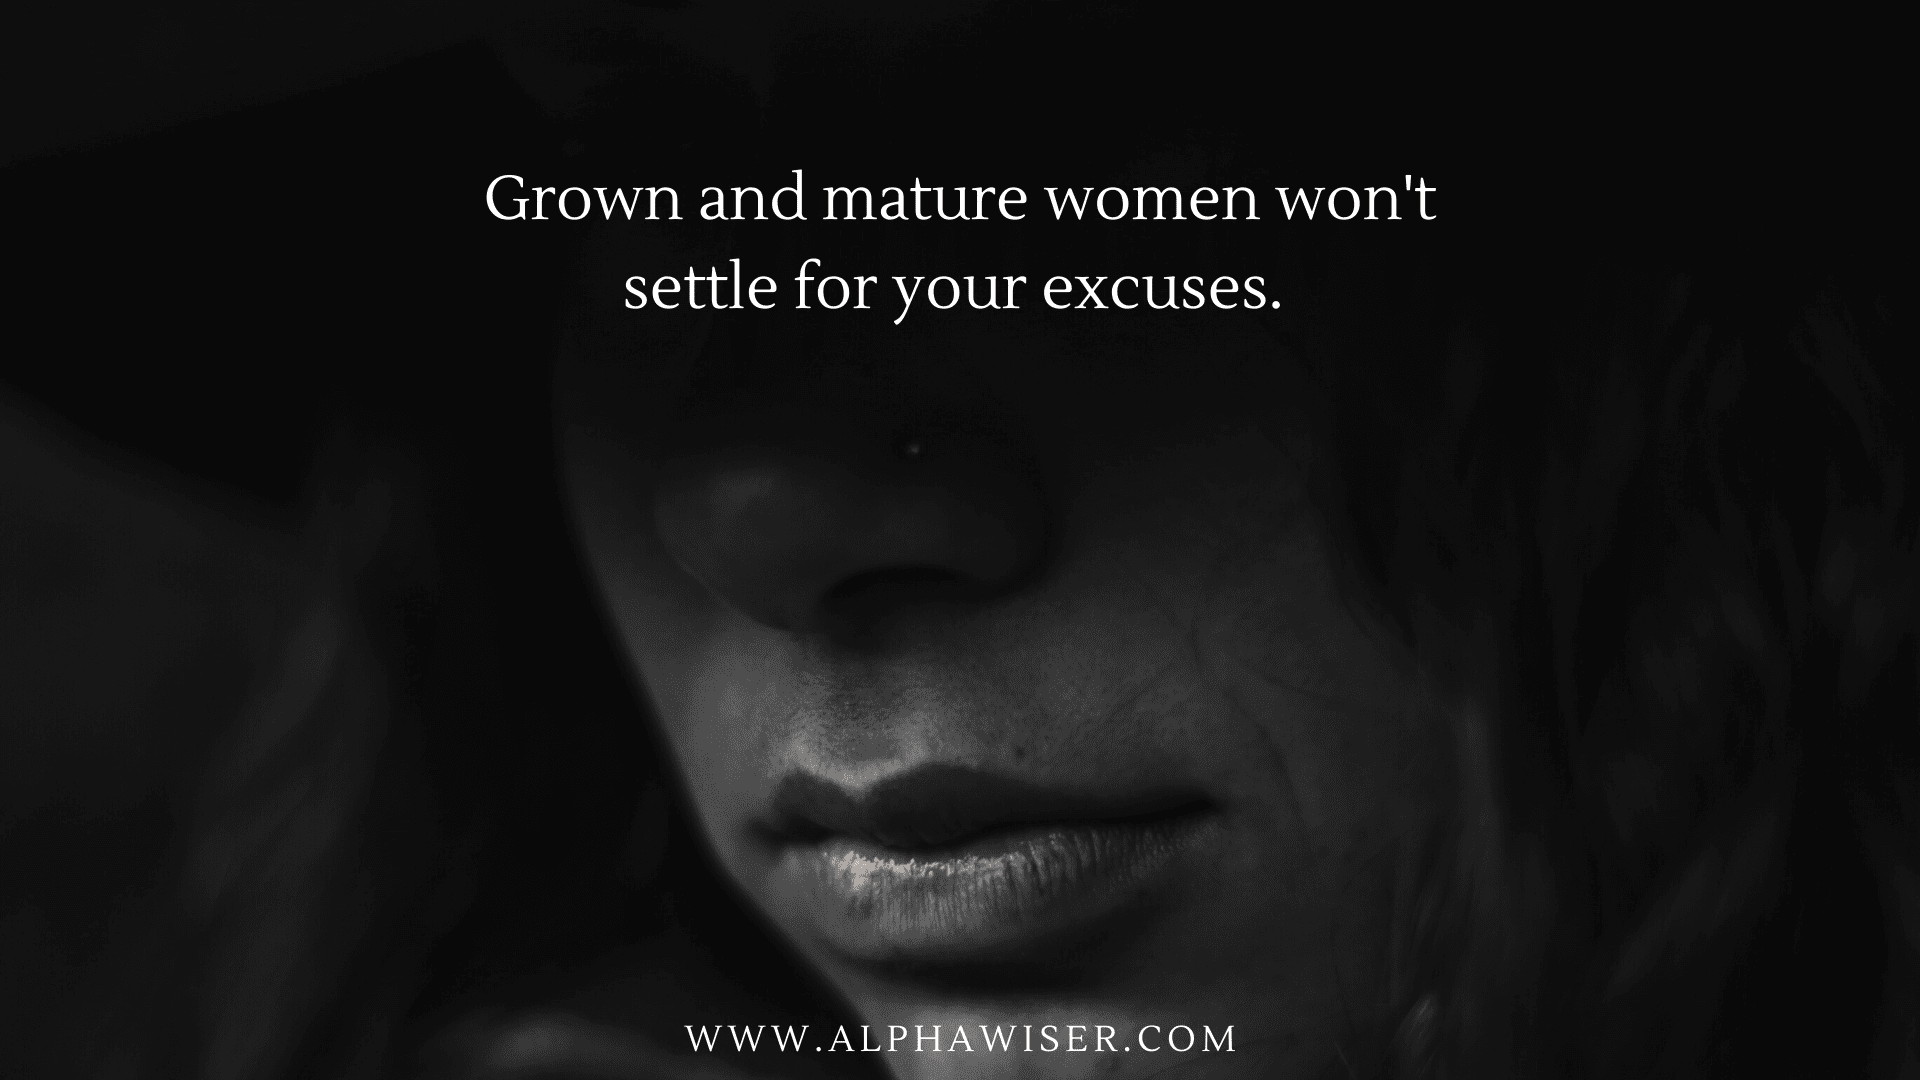 A Mature and grown woman won’t settle for your excuses